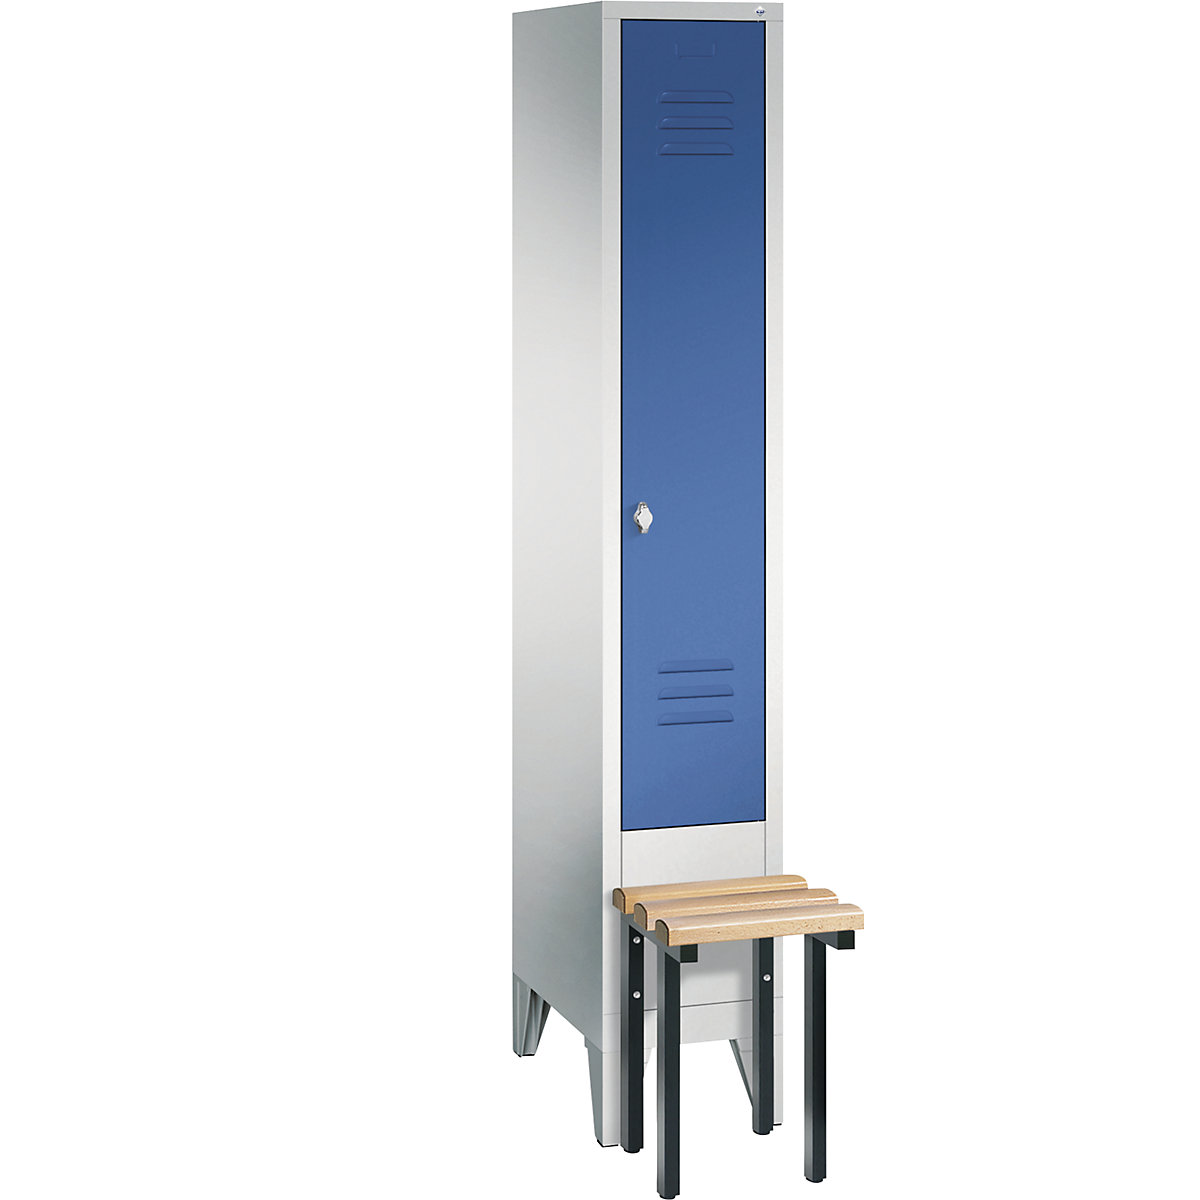 CLASSIC cloakroom locker with bench mounted in front – C+P, 1 compartment, compartment width 300 mm, light grey / gentian blue-9